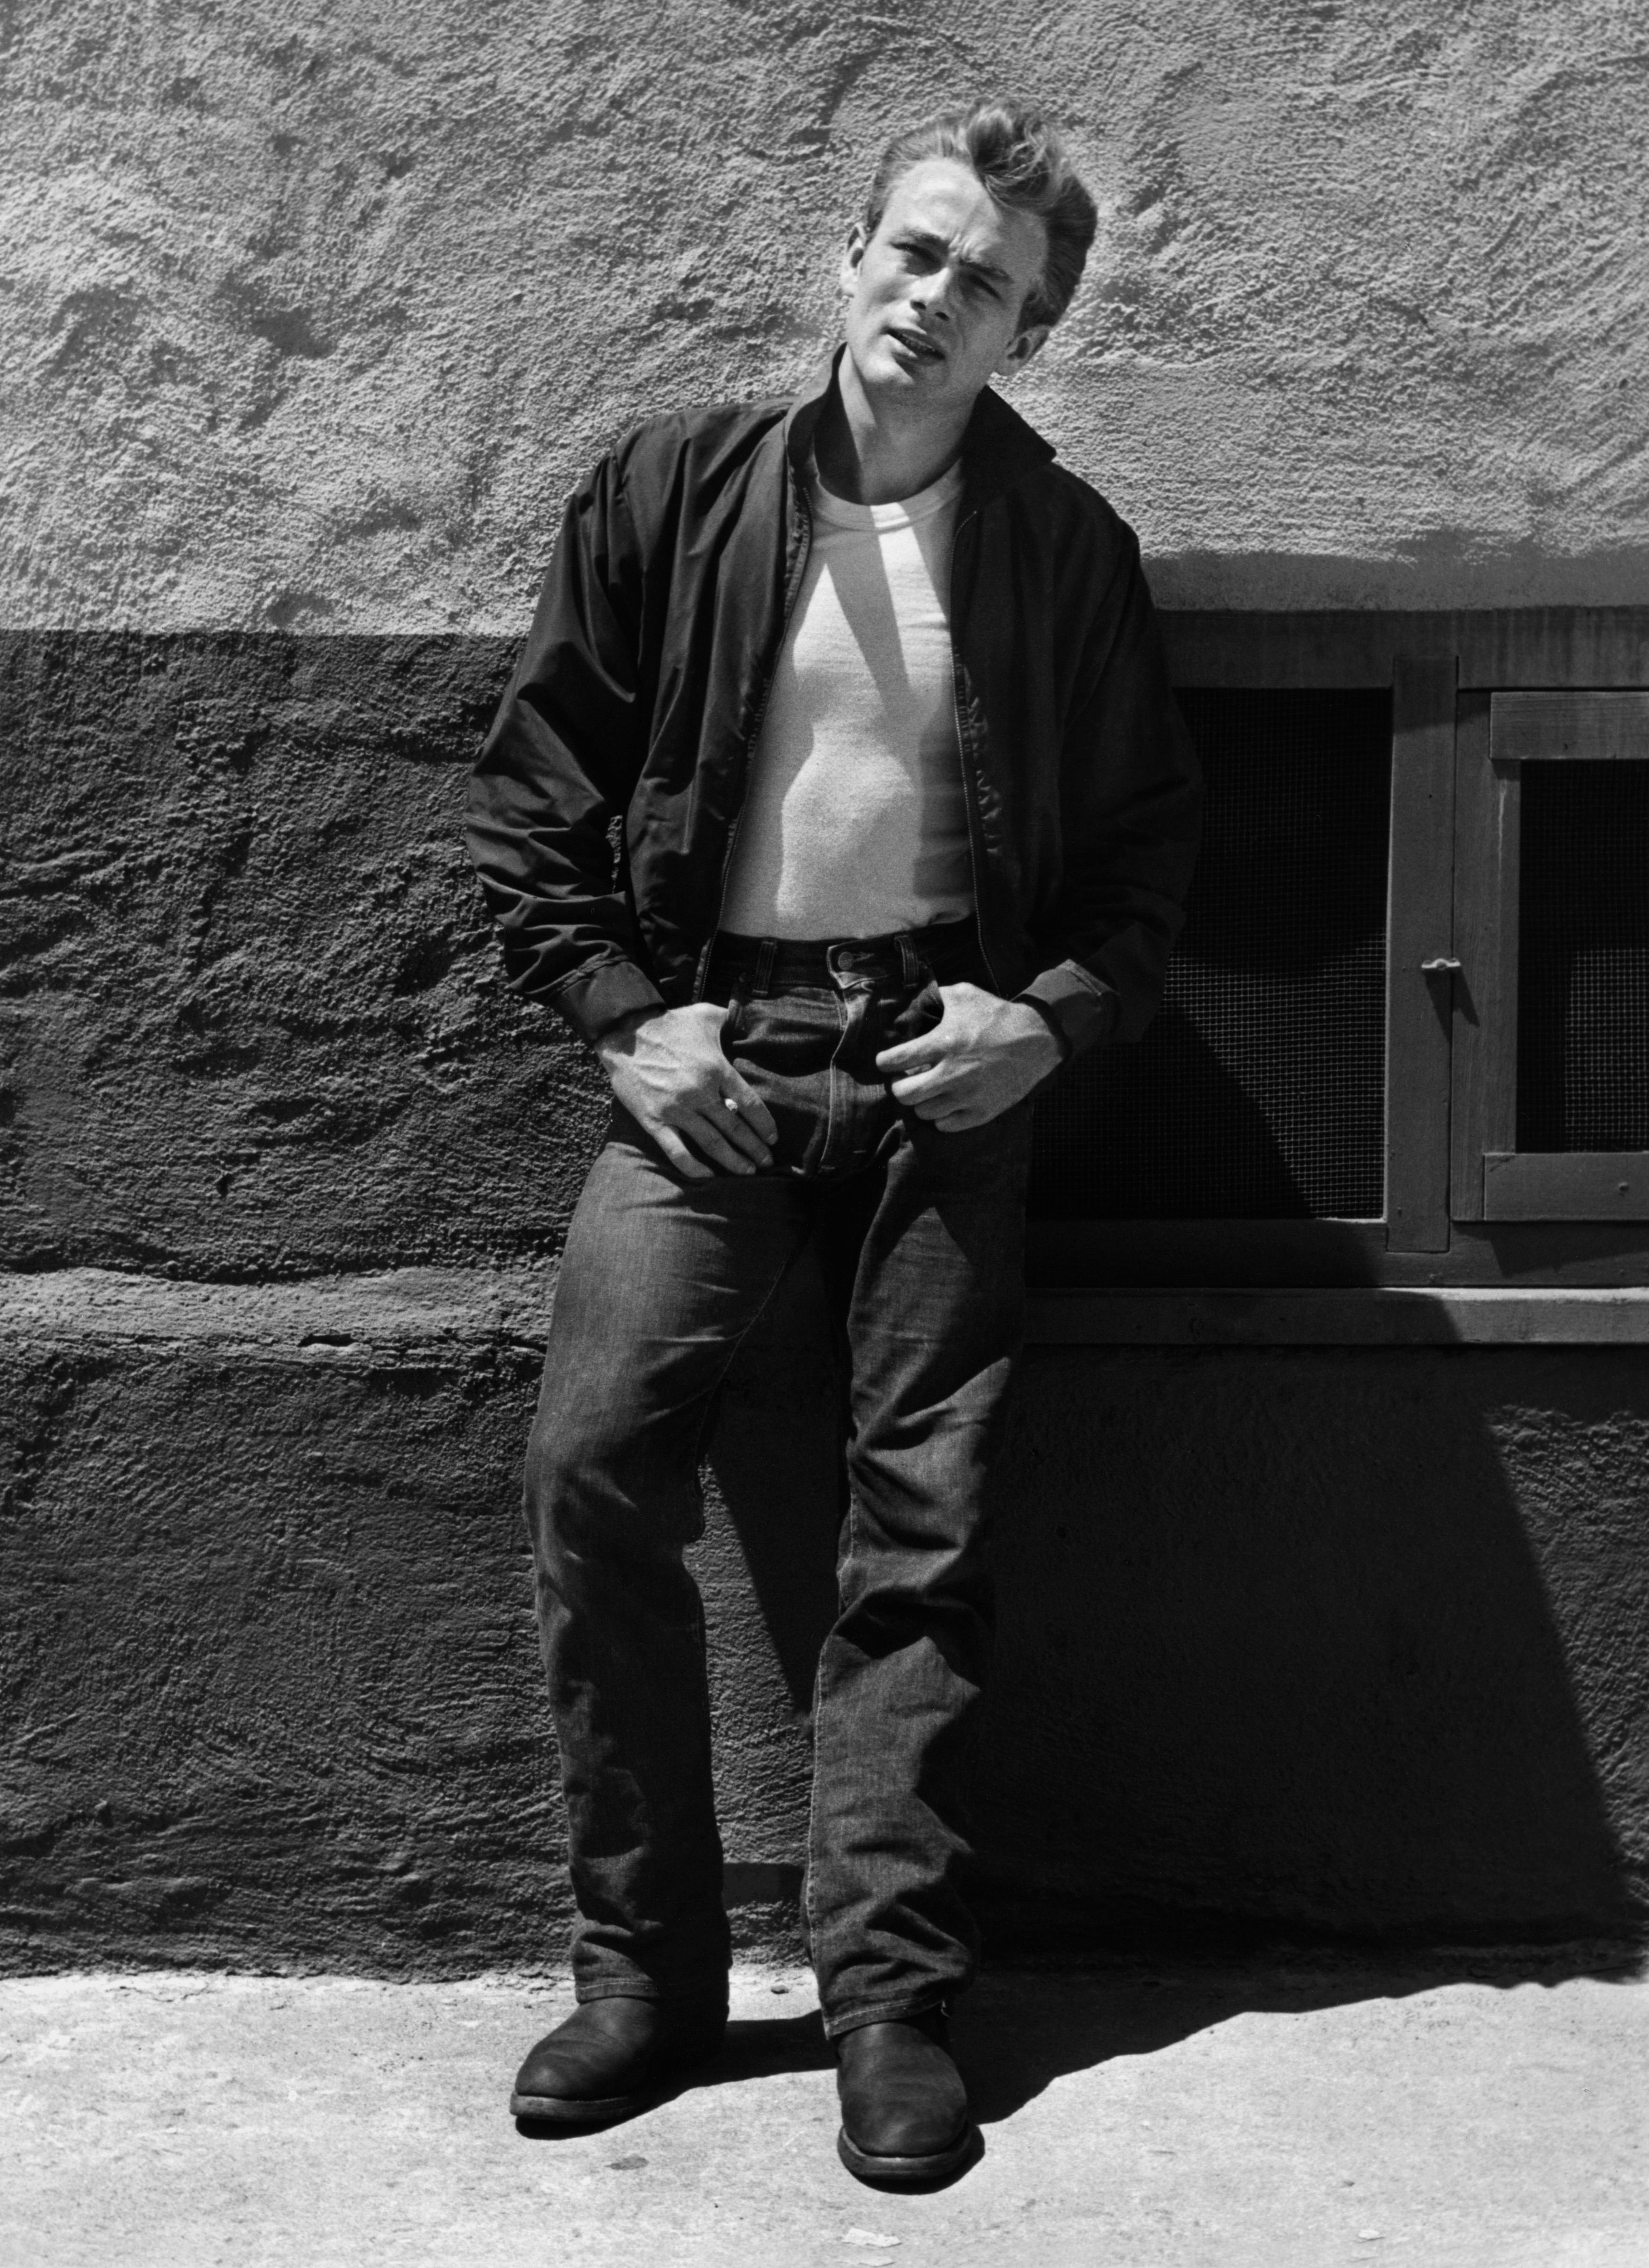 Unknown Portrait Photograph - James Dean Leaning in Rebel Without a Cause Globe Photos Fine Art Print